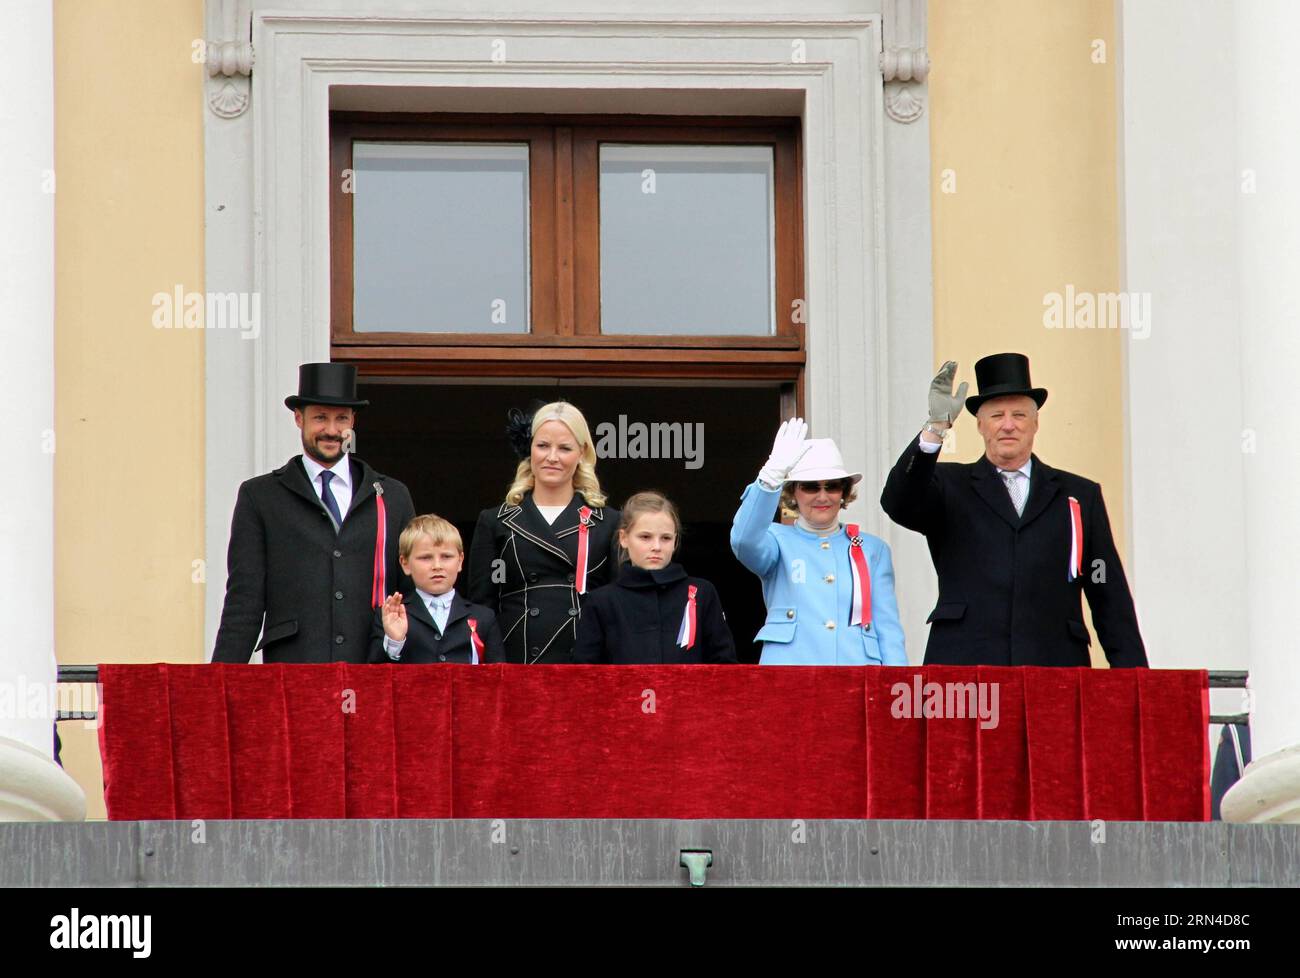 (150517) -- OSLO, May 17, 2015 -- King Harald V., Queen Sonja, Prince Haakon, Princess Mette-Marit, Ingrid-Alexandra und Sverre Magnus - Norway s royal family watch a parade marking the country s Independence Day in Oslo, Norway, May 17, 2015. ) NORWAY-OSLO-INDEPENDENCE DAY LiangxYouchang PUBLICATIONxNOTxINxCHN   150517 Oslo May 17 2015 King Harald V Queen Sonja Prince Haakon Princess Mette Marit Ingrid Alexandra and Sverre Magnus Norway S Royal Family Watch a Parade marking The Country S Independence Day in Oslo Norway May 17 2015 Norway Oslo Independence Day LiangxYouchang PUBLICATIONxNOTxIN Stock Photo